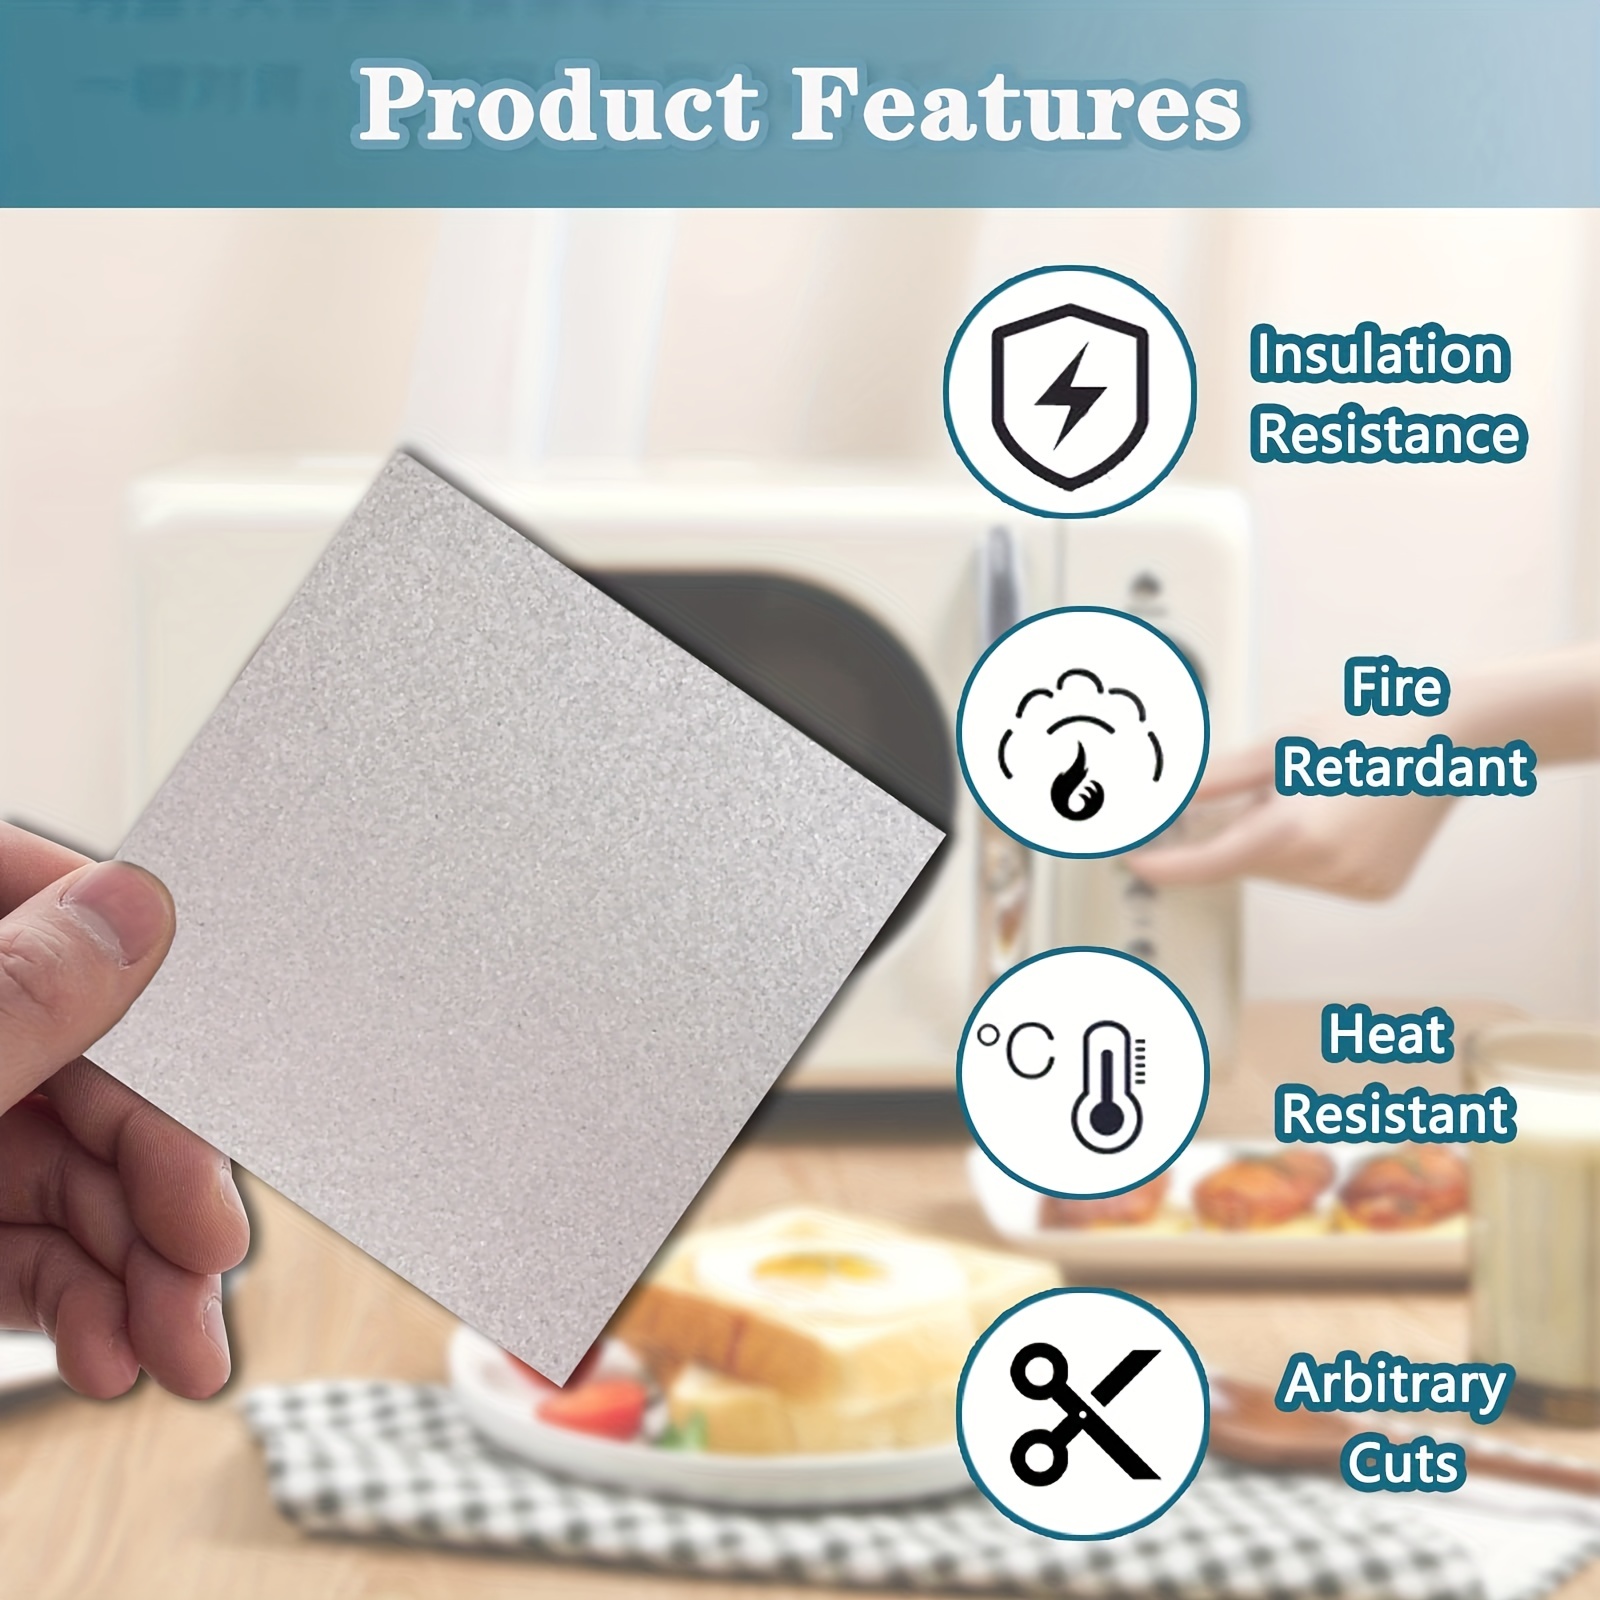 Microwave Cover Transparent Dust-proof Easy Clean Microwave